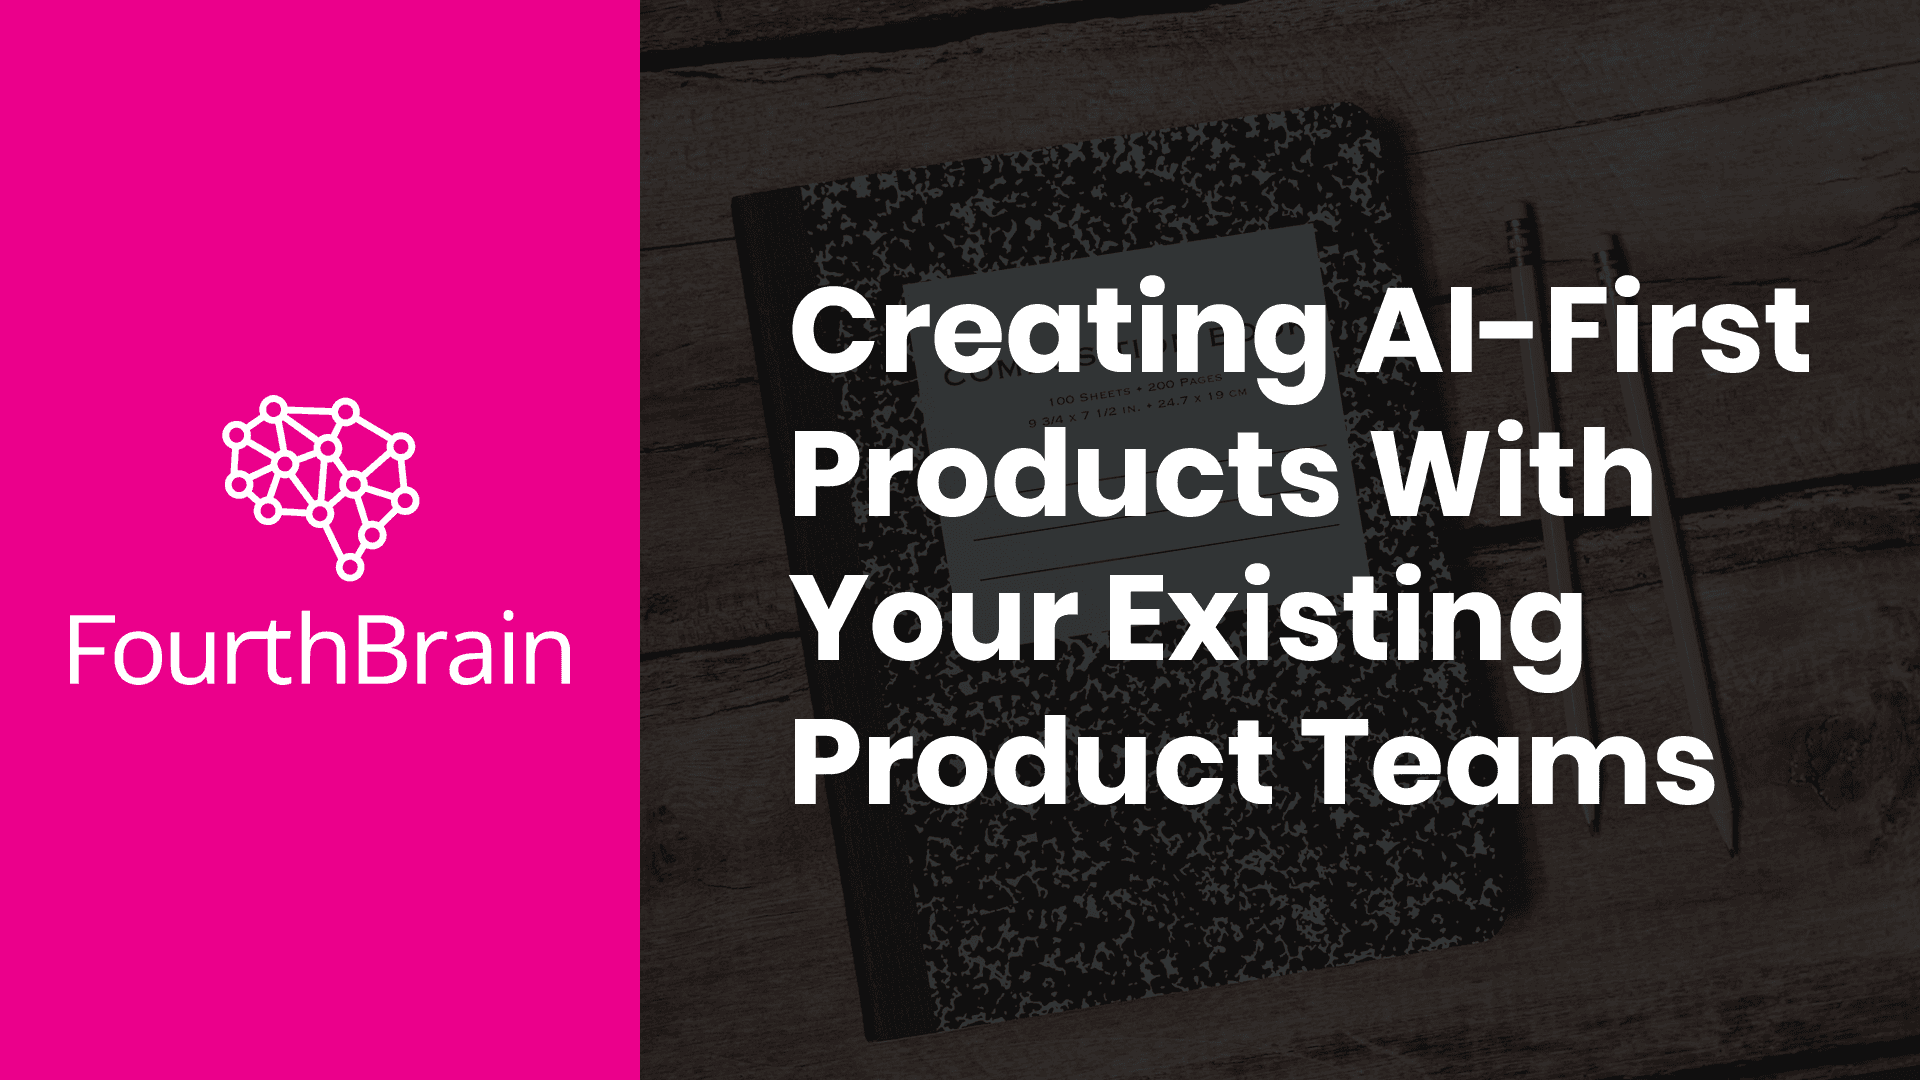 Product Webinar Replay: Creating AI-First Products With Your Existing Product Teams - FourthBrain image